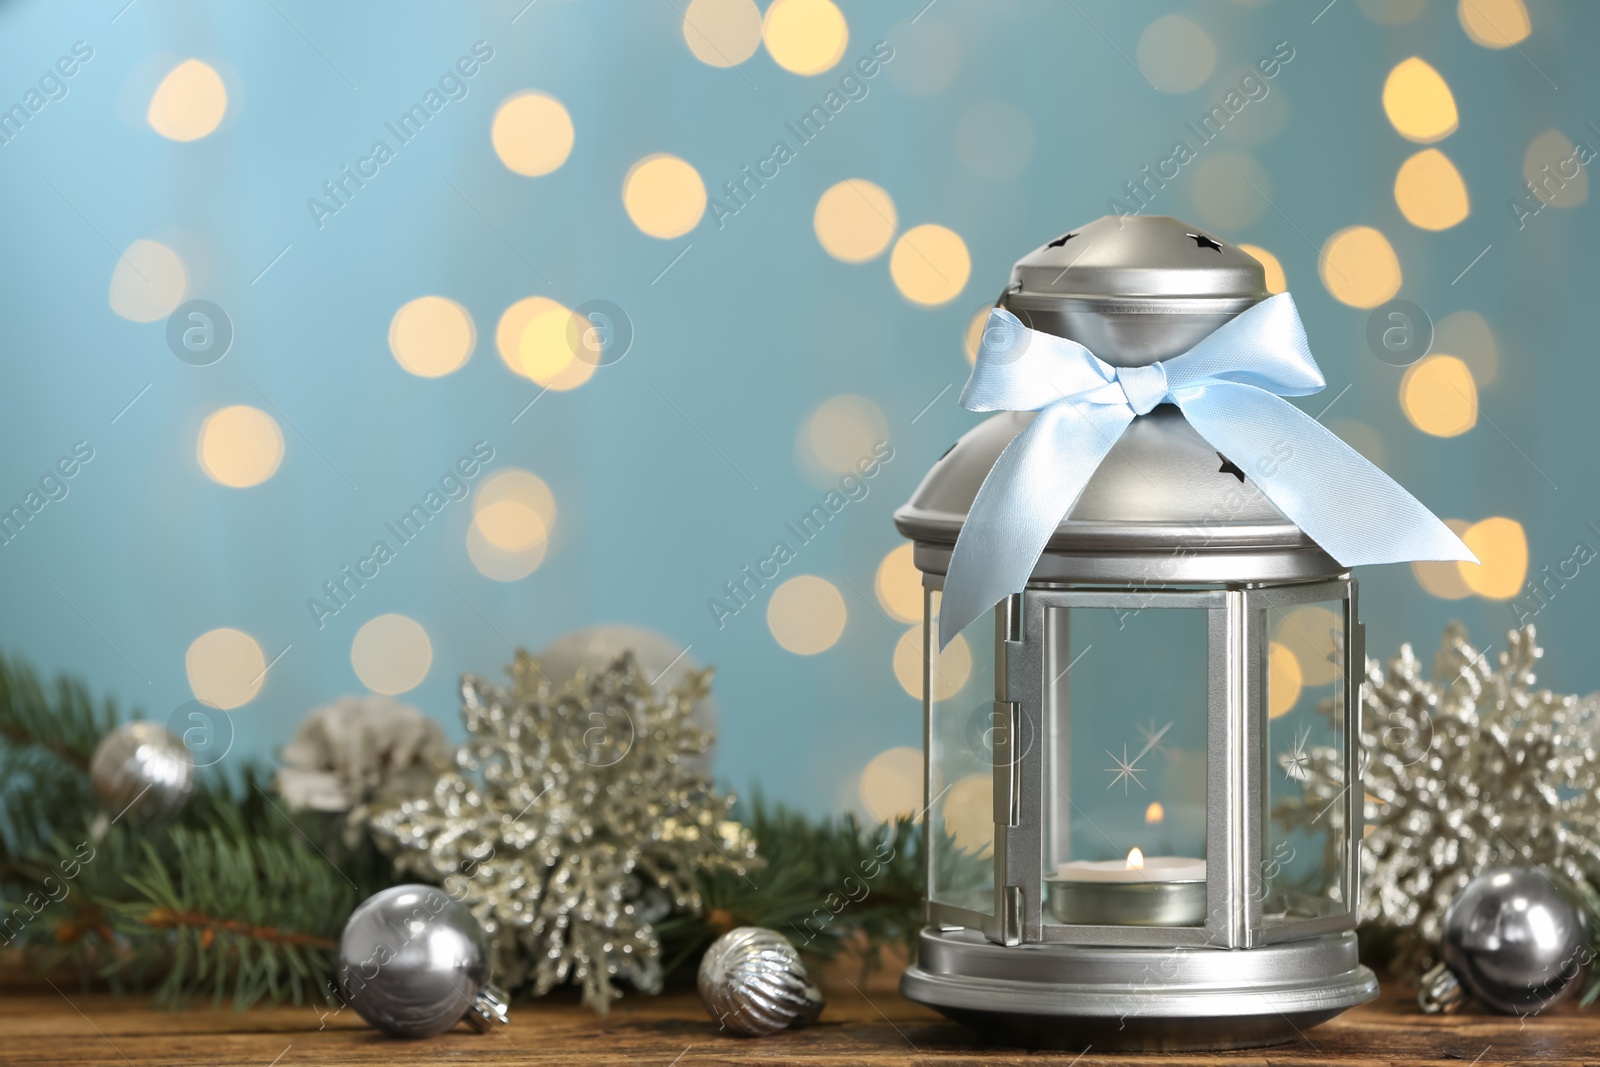 Photo of Christmas lantern with burning candle and festive ornaments on wooden table against blurred lights. Space for text